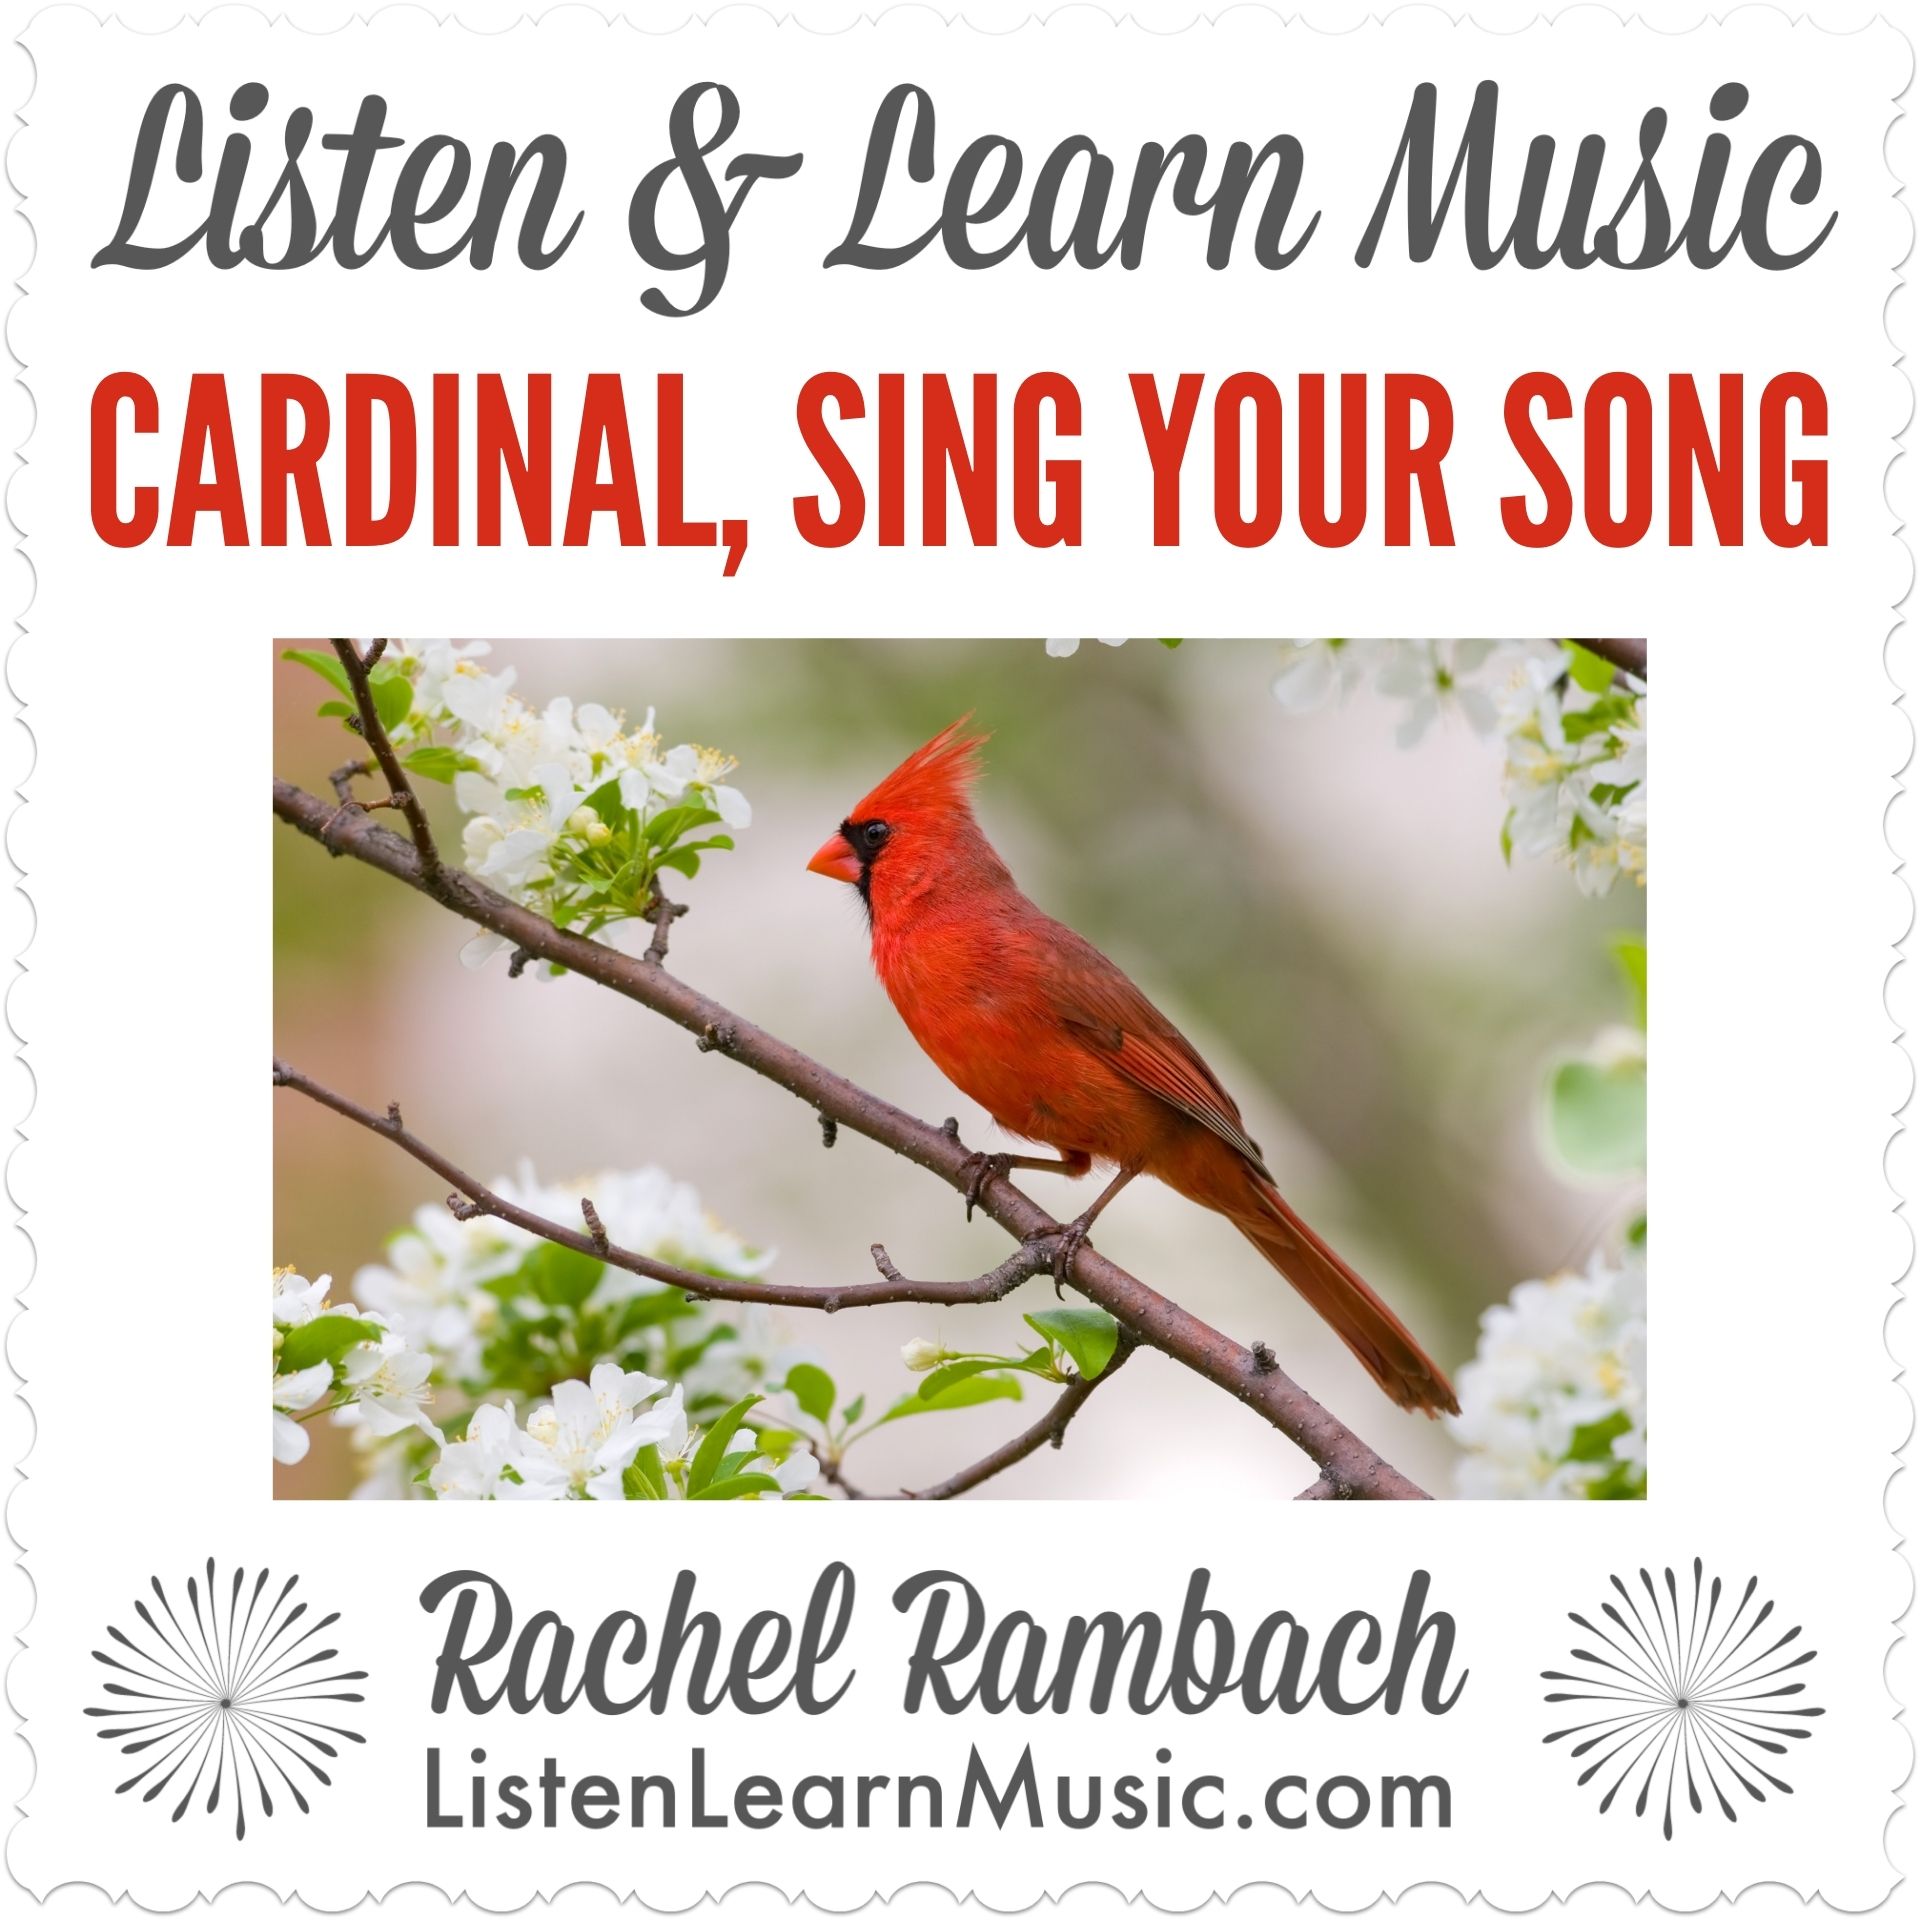 Cardinal, Sing Your Song | Listen & Learn Music